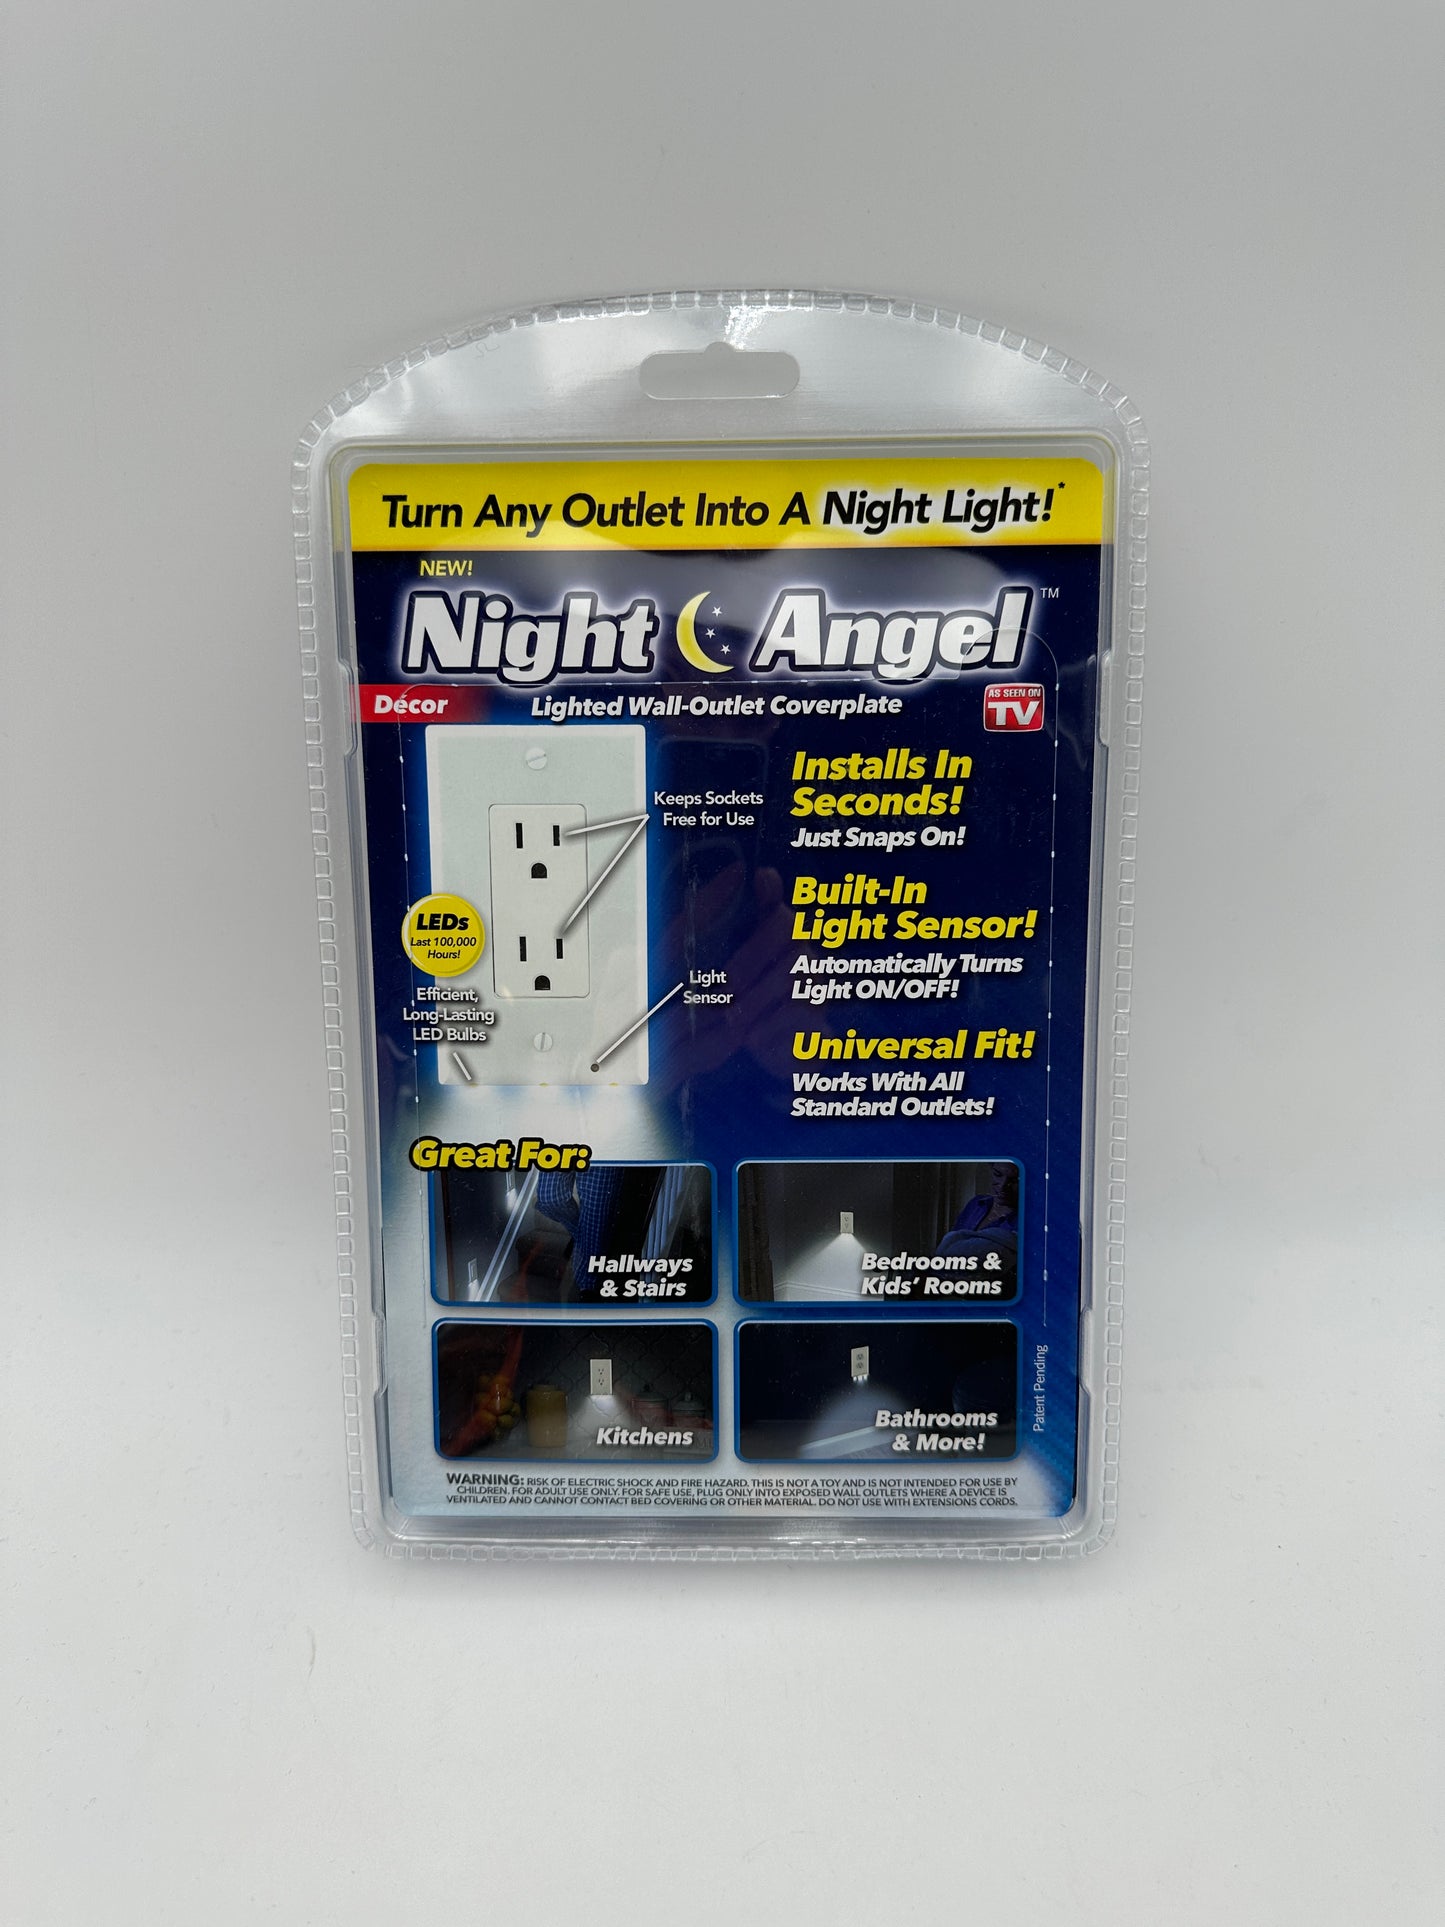 Ontel Products Night Angel Lighted Wall-Outlet Coverplate, new (currently have qty 2)